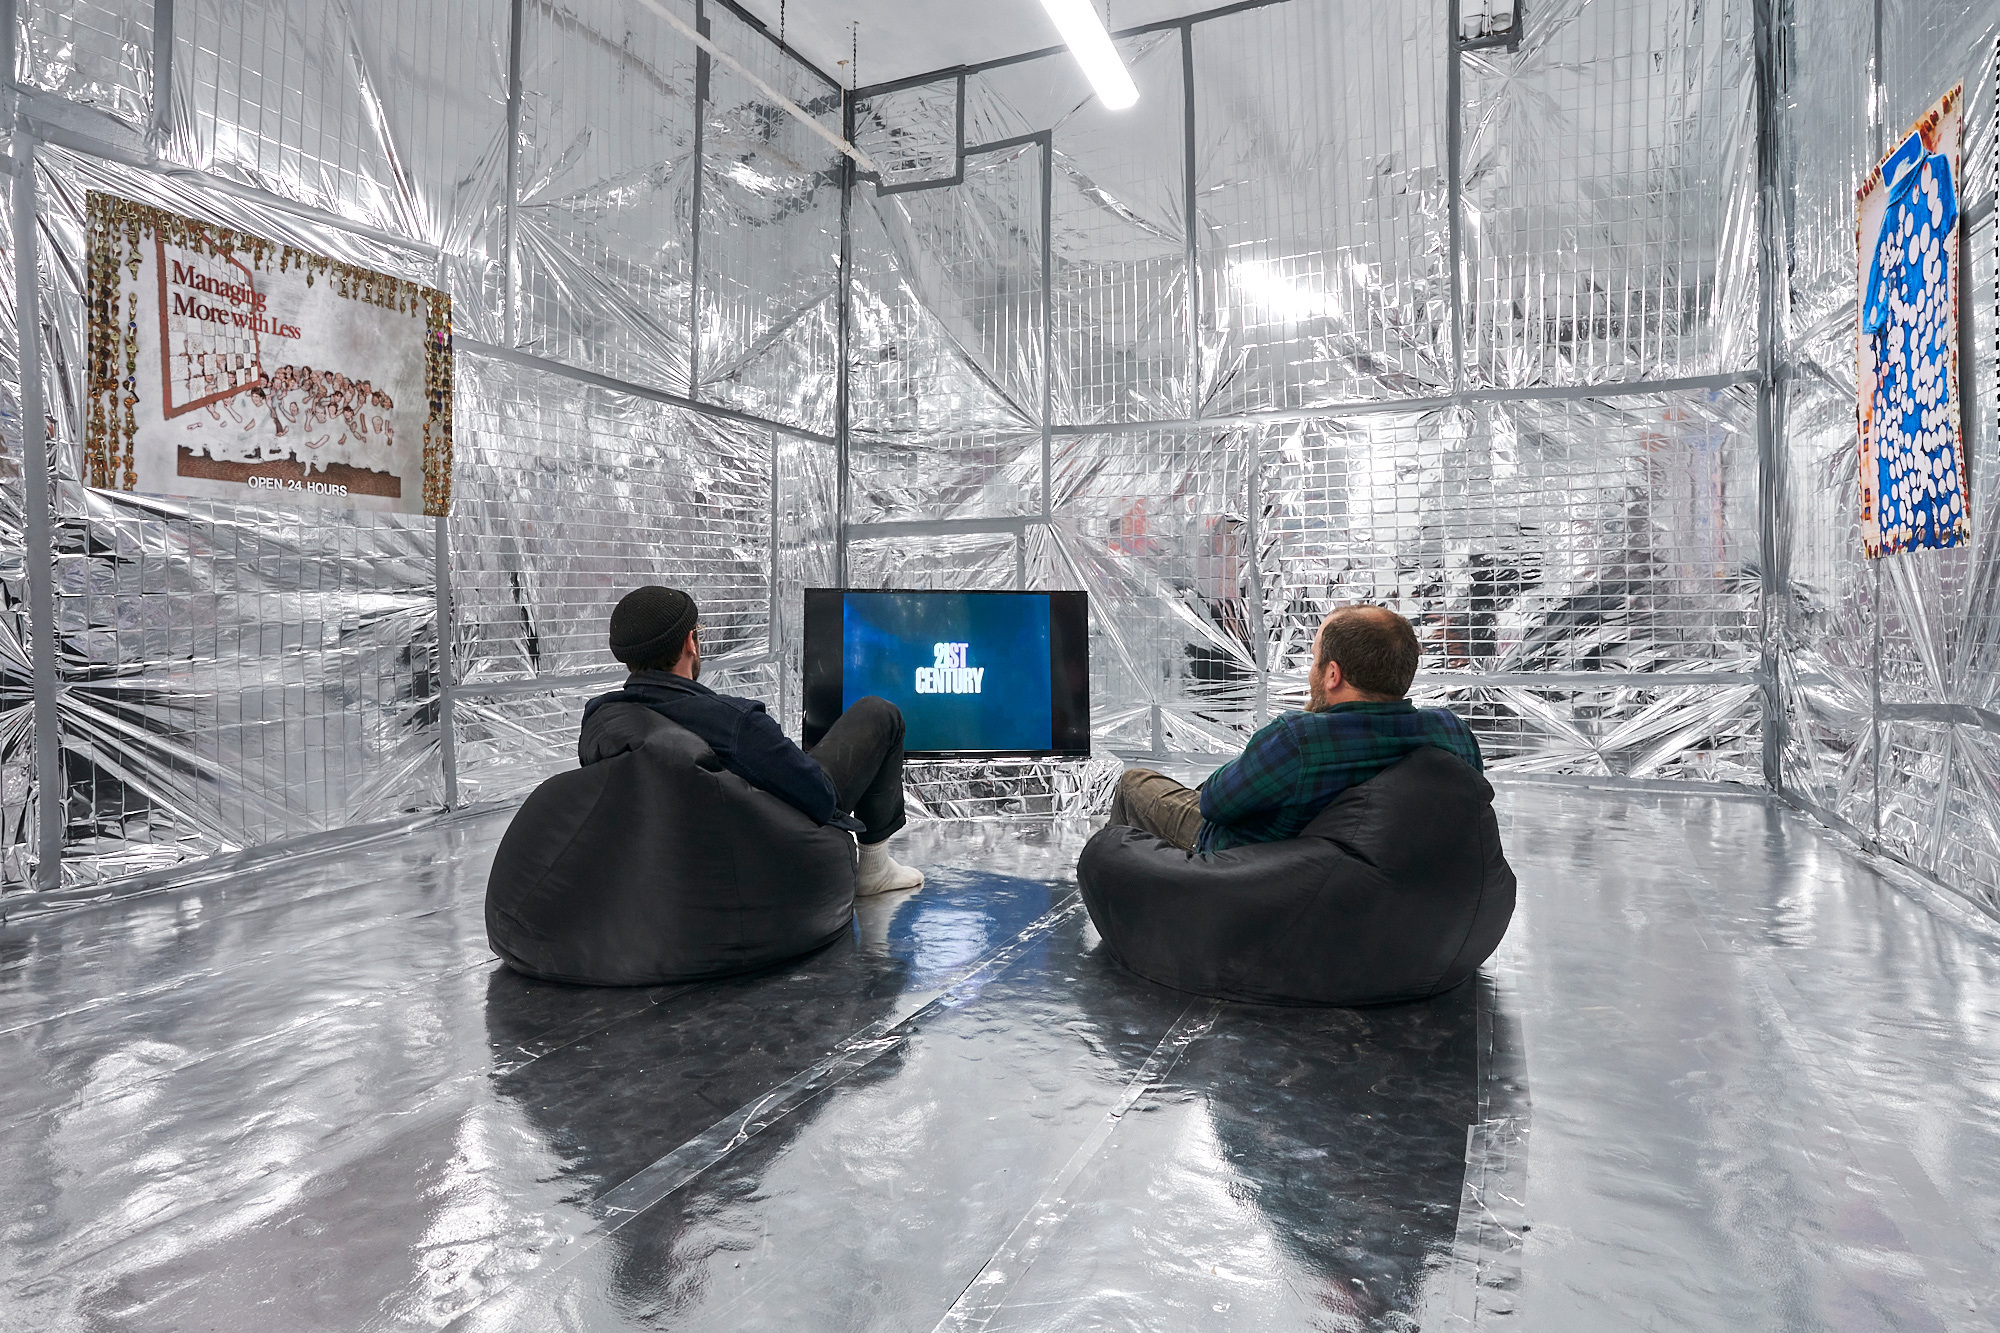 Duncan Poulton & Nick Smith, 'Y2K' (2023), single-channel digital video. Install view at Division of Labour, Salford, 2023. Photo by Rob Battersby